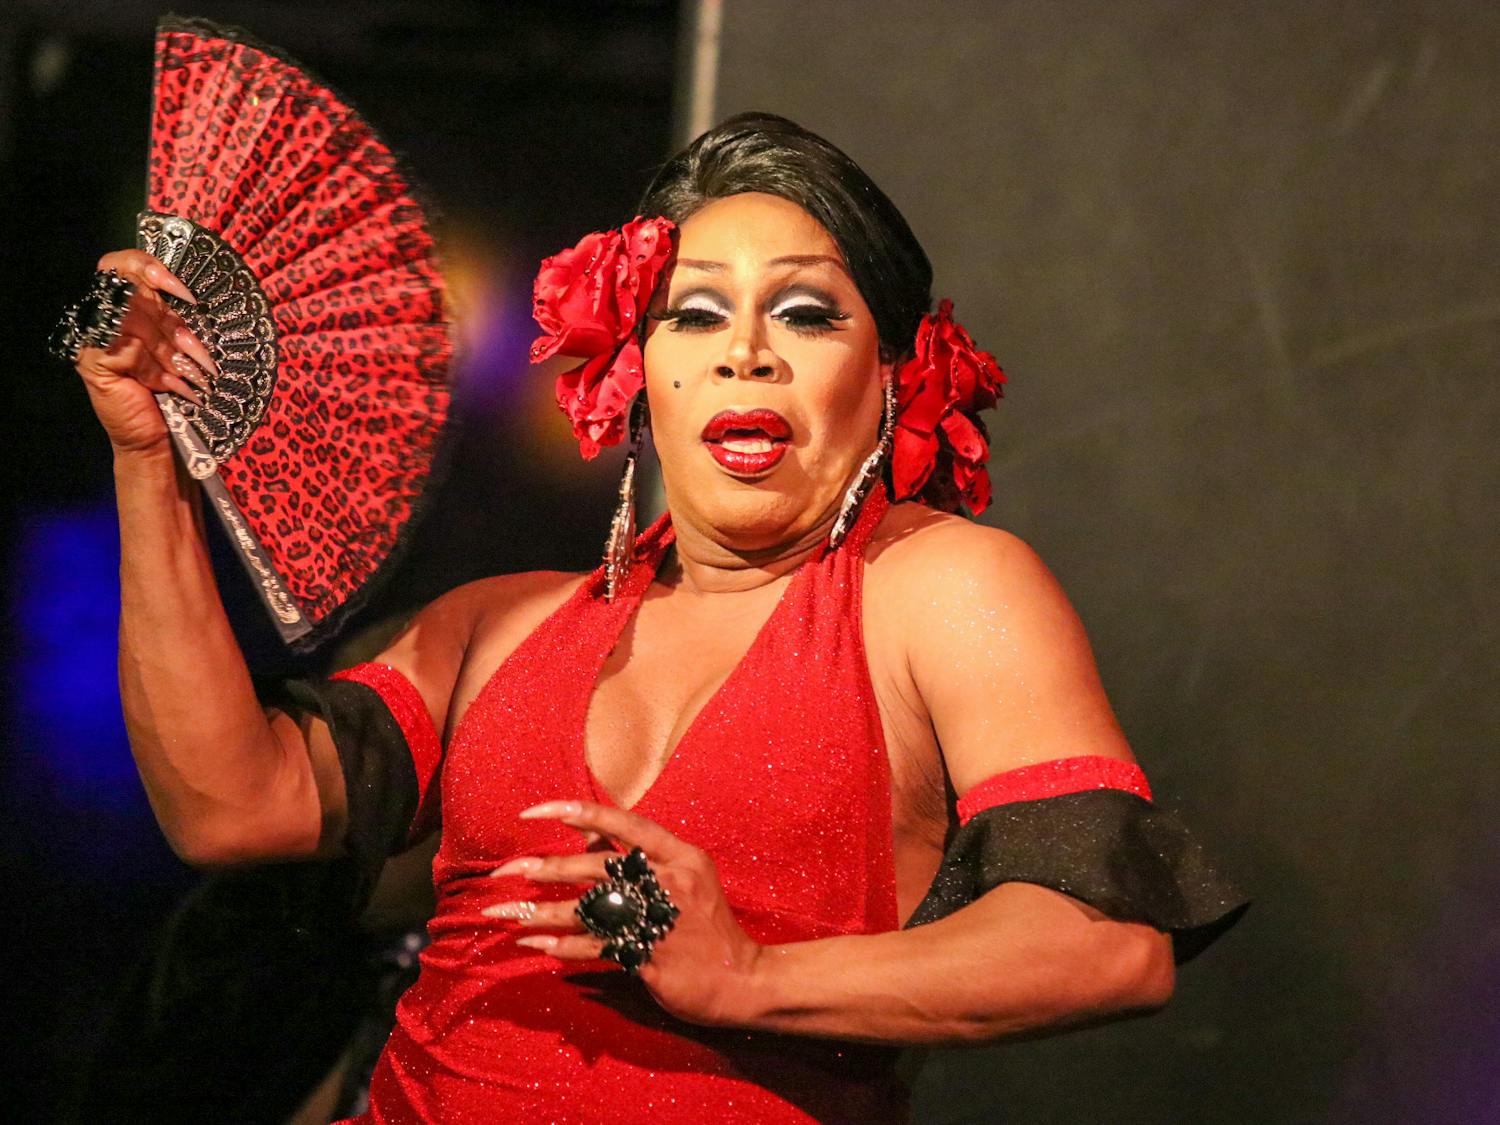 Dorae Saunders takes a break from hosting the drag show at PT's 1109 to perform her own set on Sept. 10, 2022. Decked in red from head to toe, she accented her romantic performance with a cheetah print fan.&nbsp;